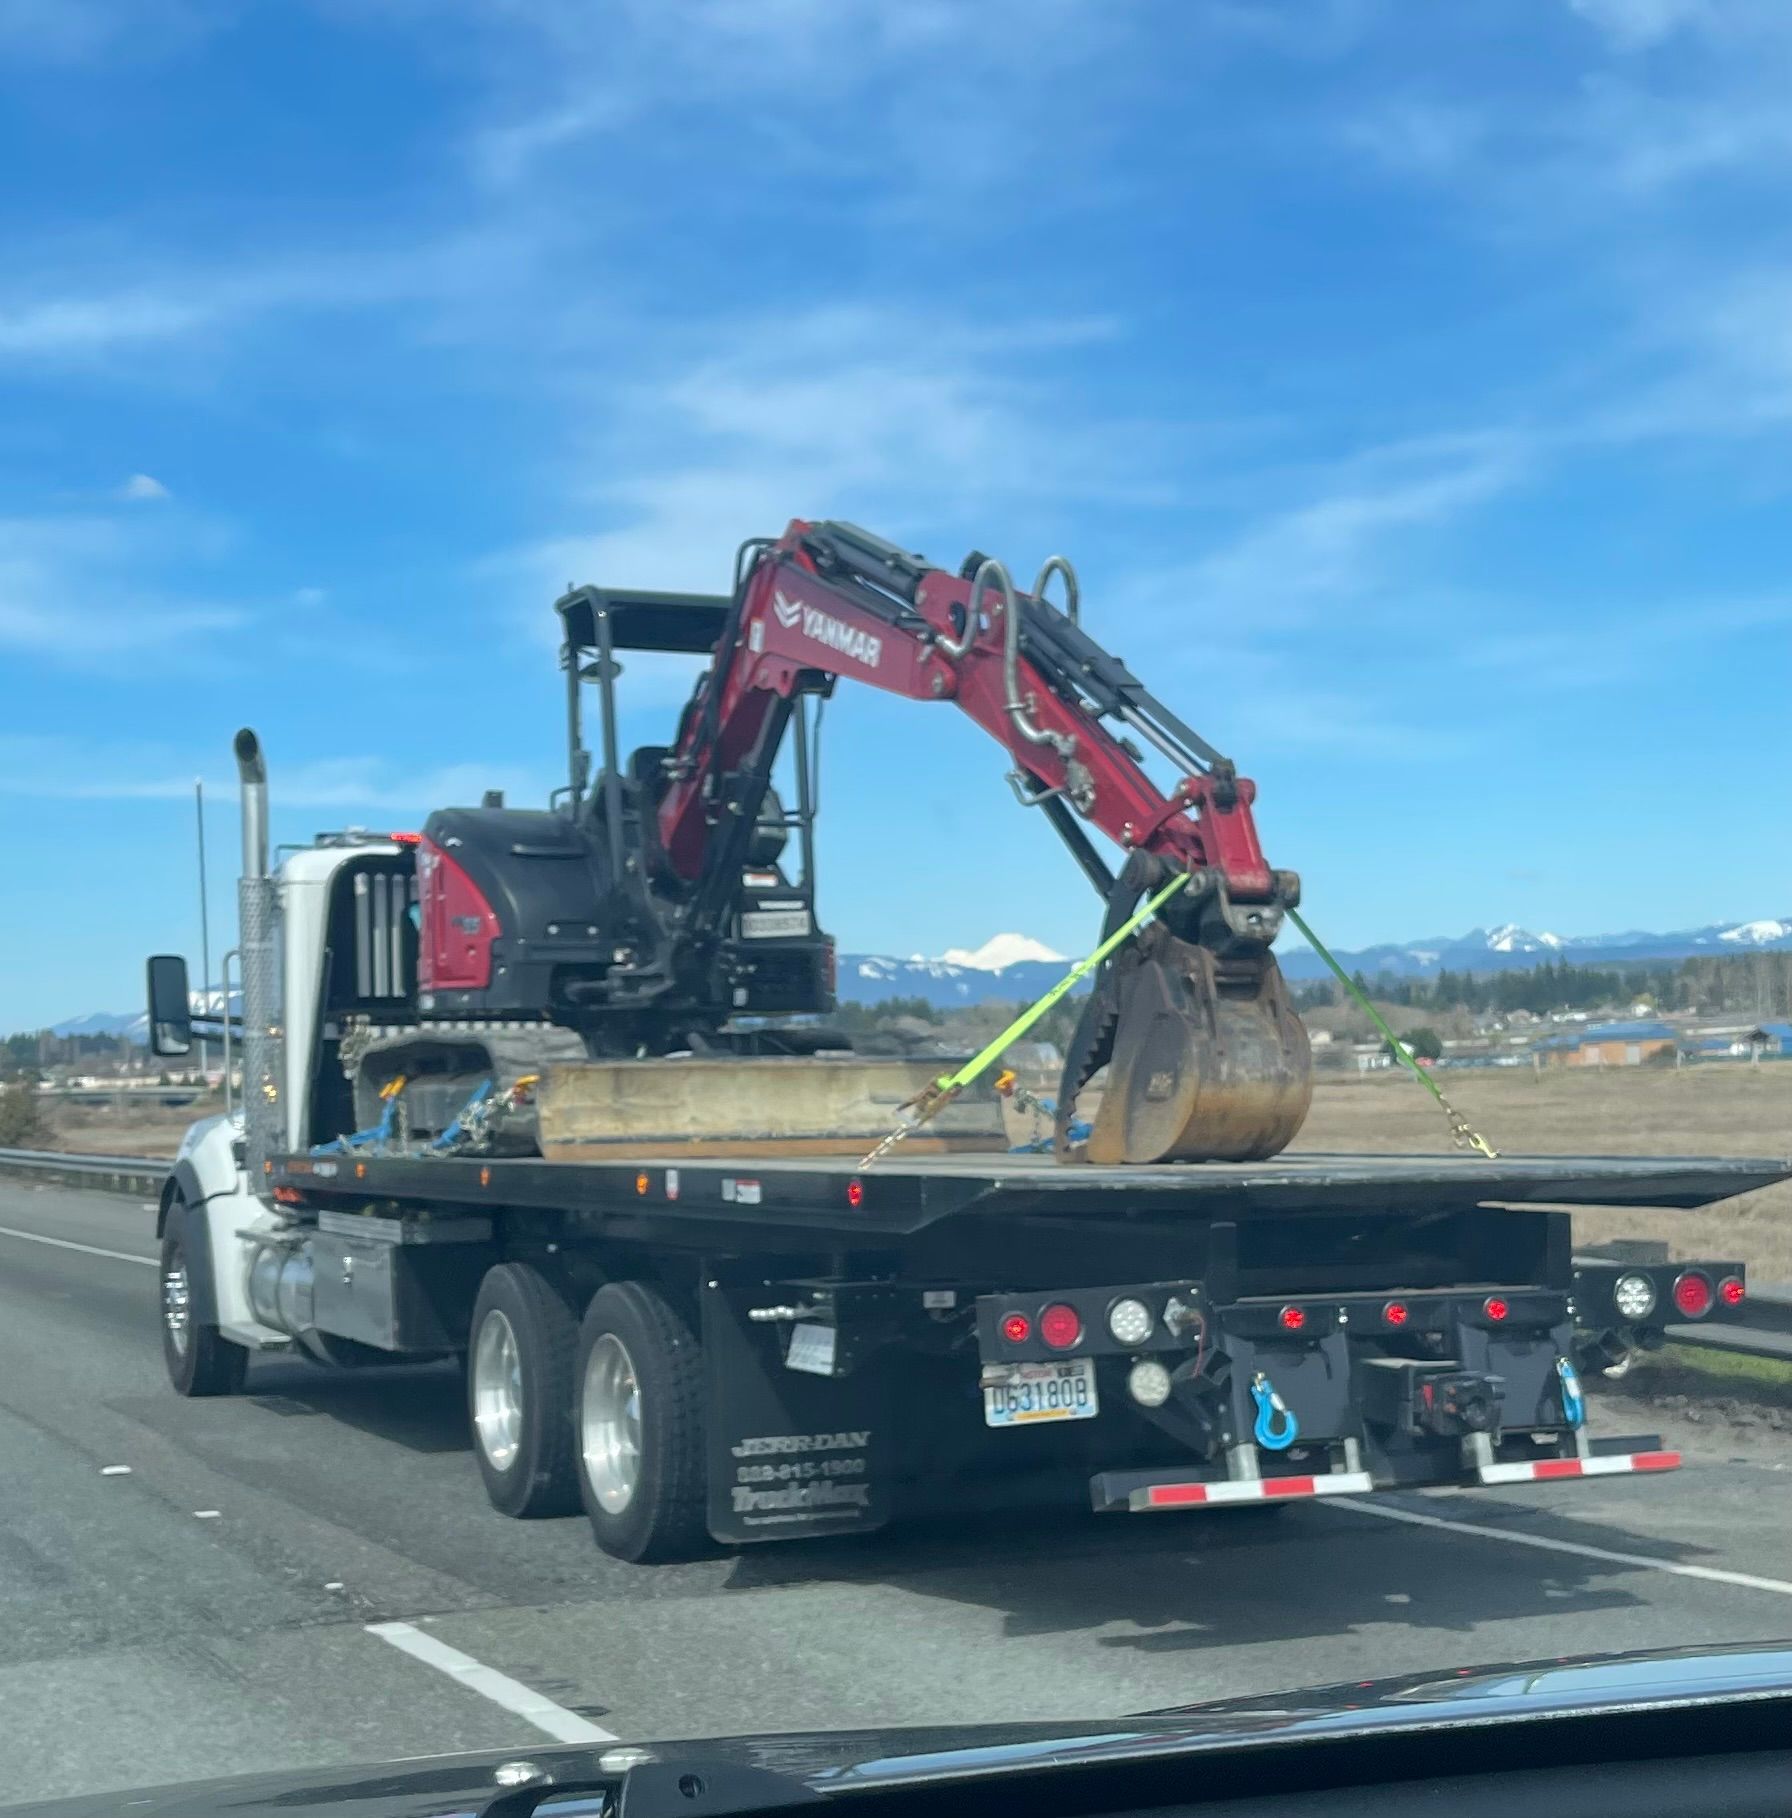 A tow truck with an excavator on the back of it